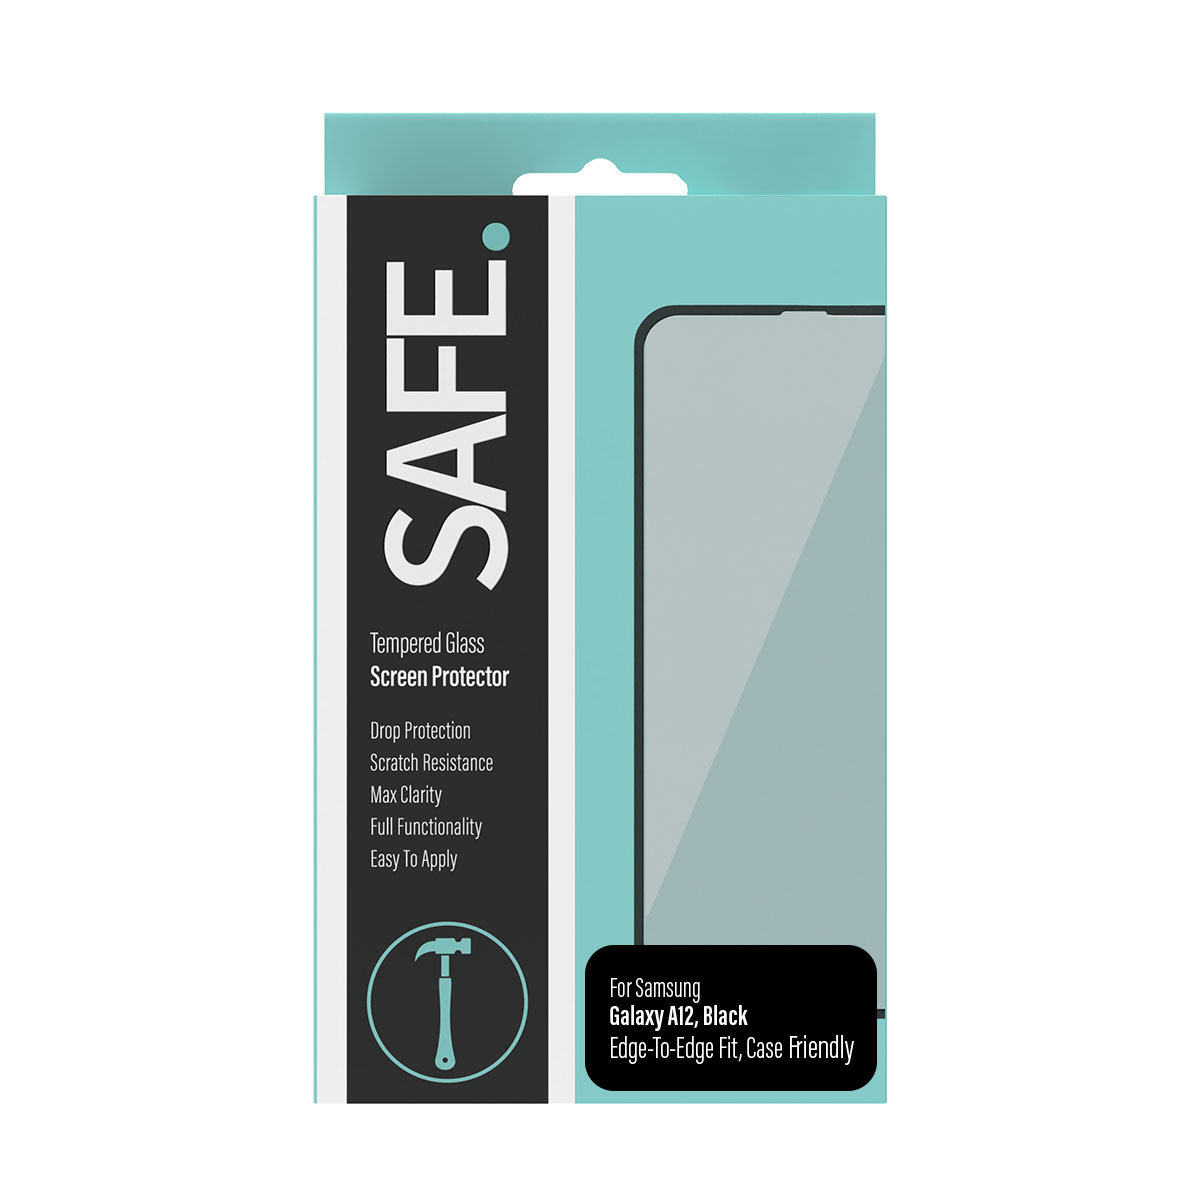 SAFE Samsung Galaxy A12 -  Screen Protector - Drop Protective, Scratch Resistance, Max Clarity